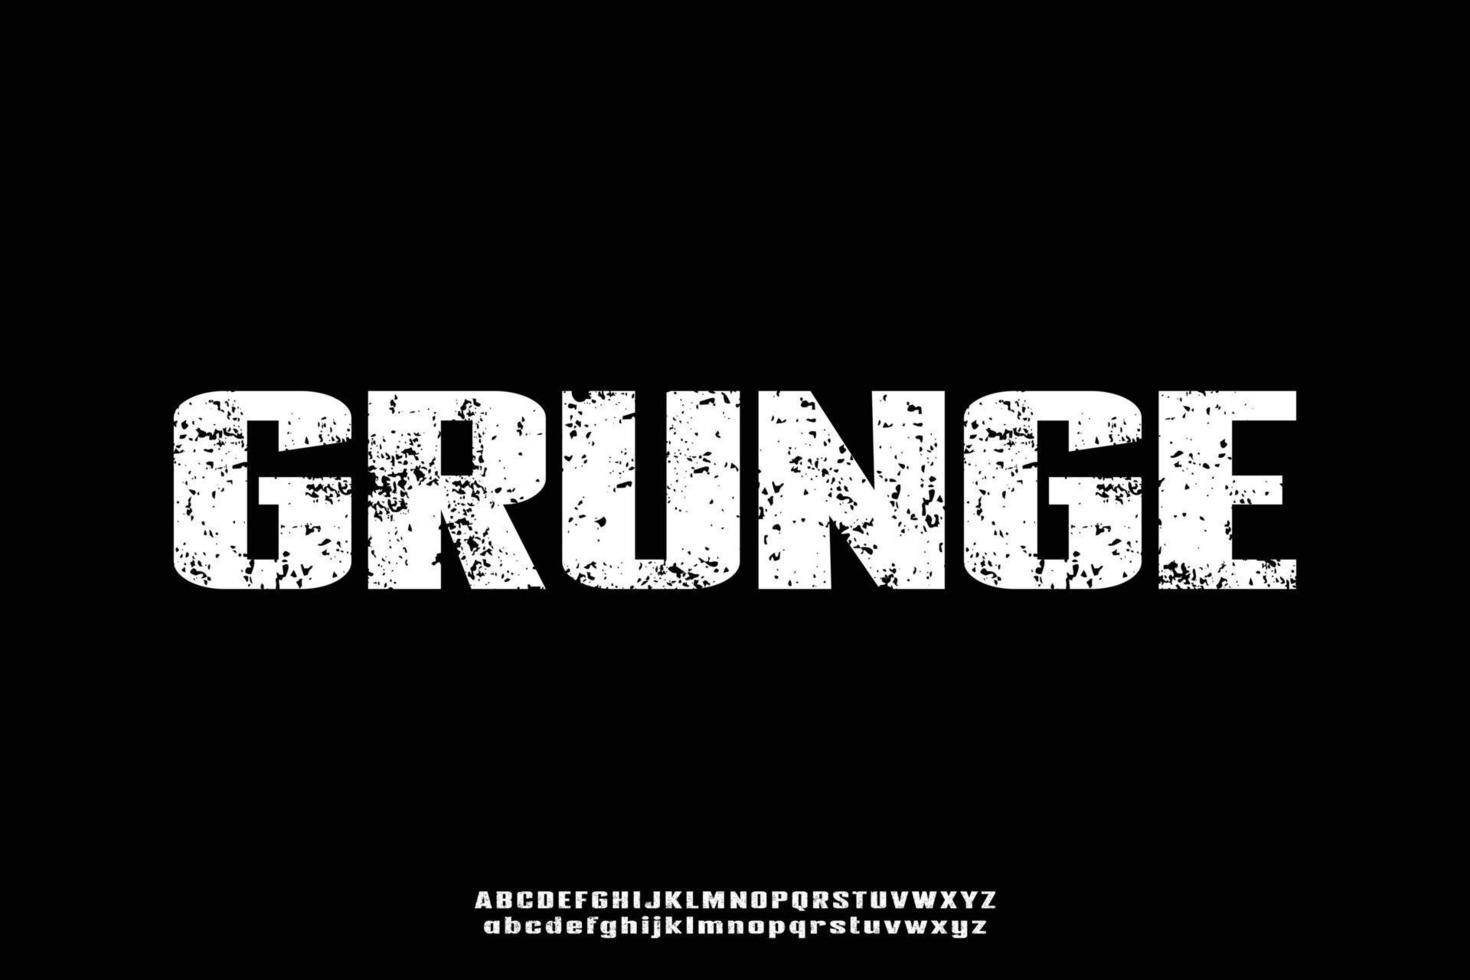 Strong sans serif display font vector with grunge texture